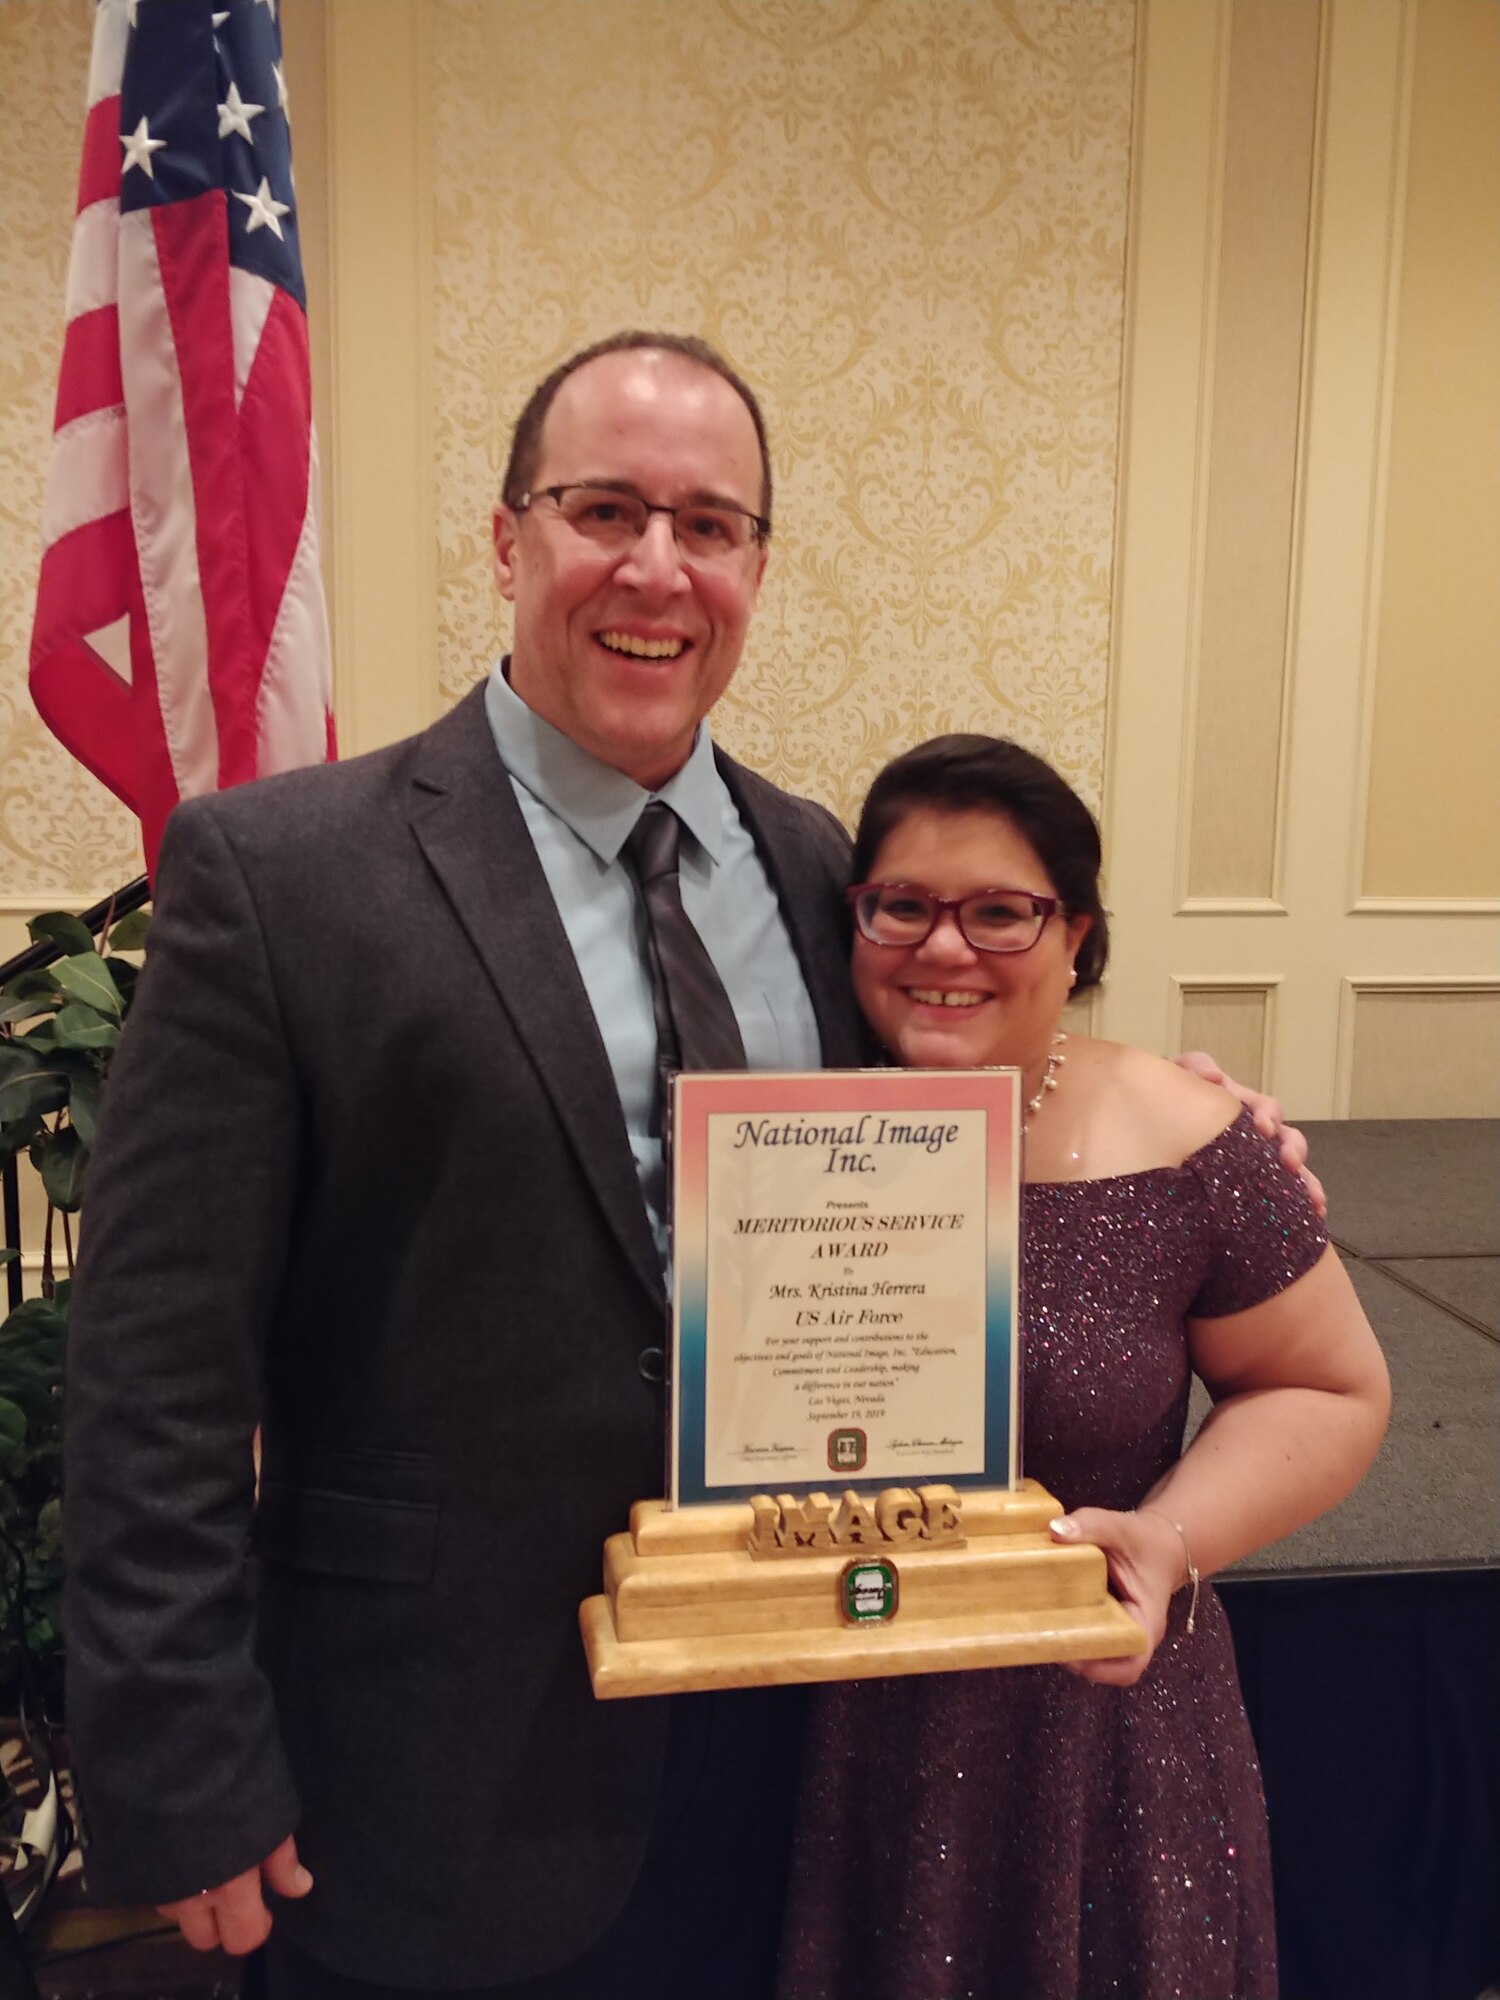 Kristine Herrera poses with her spouse, retired Air Force Master Sgt. Gustavo Herrera, shortly after receiving the National Image Inc. 2019 Meritorious Service Award . (Photo courtesy of Kristine Herrera)